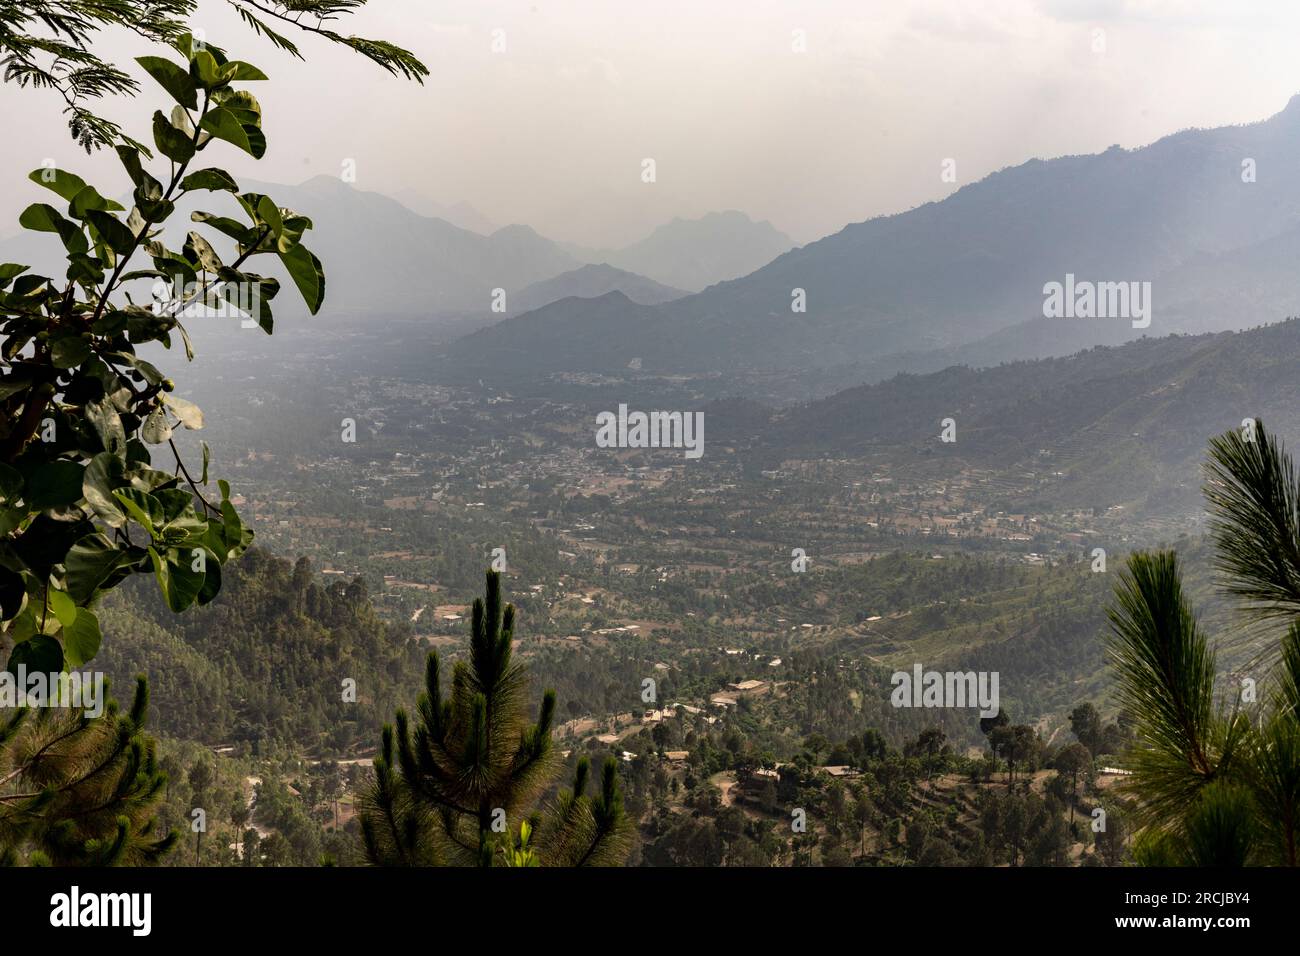 Aerial view of the houses and residential community in the Buner valley. Stock Photo